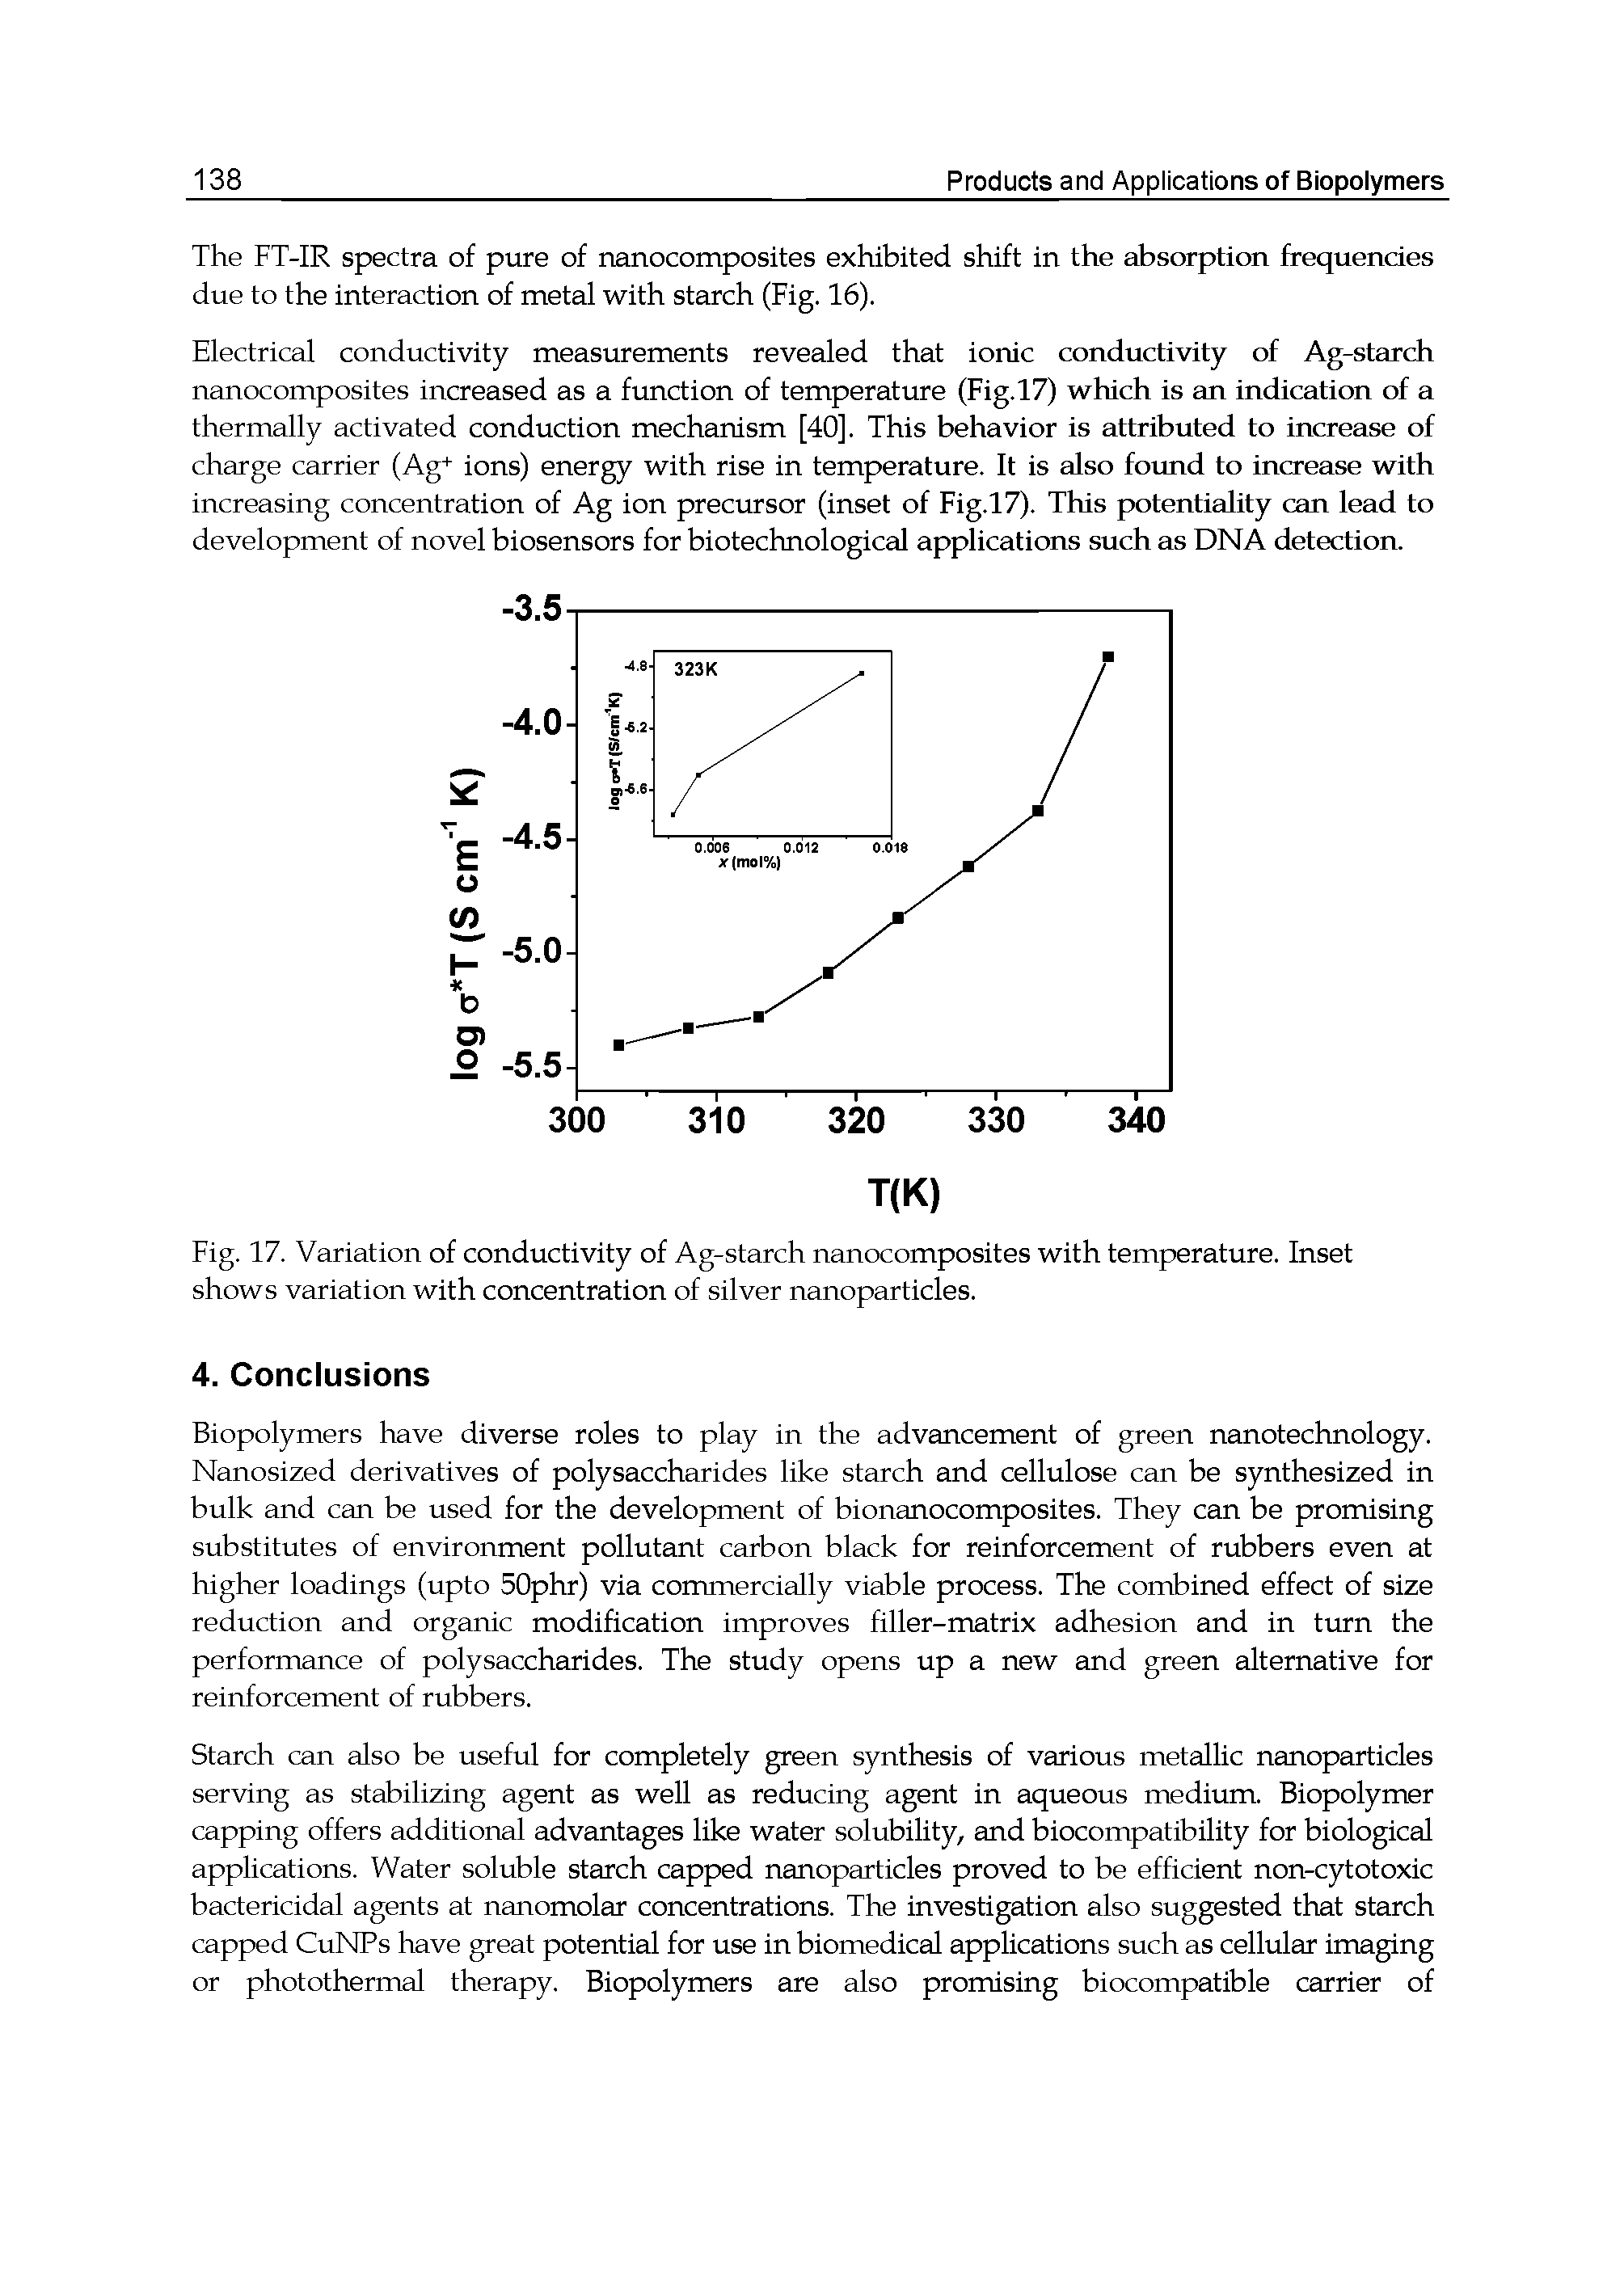 Fig. 17. Variation of conductivity of Ag-starch nanocomposites with temperature. Inset shows variation with concentration of silver nanoparticles.